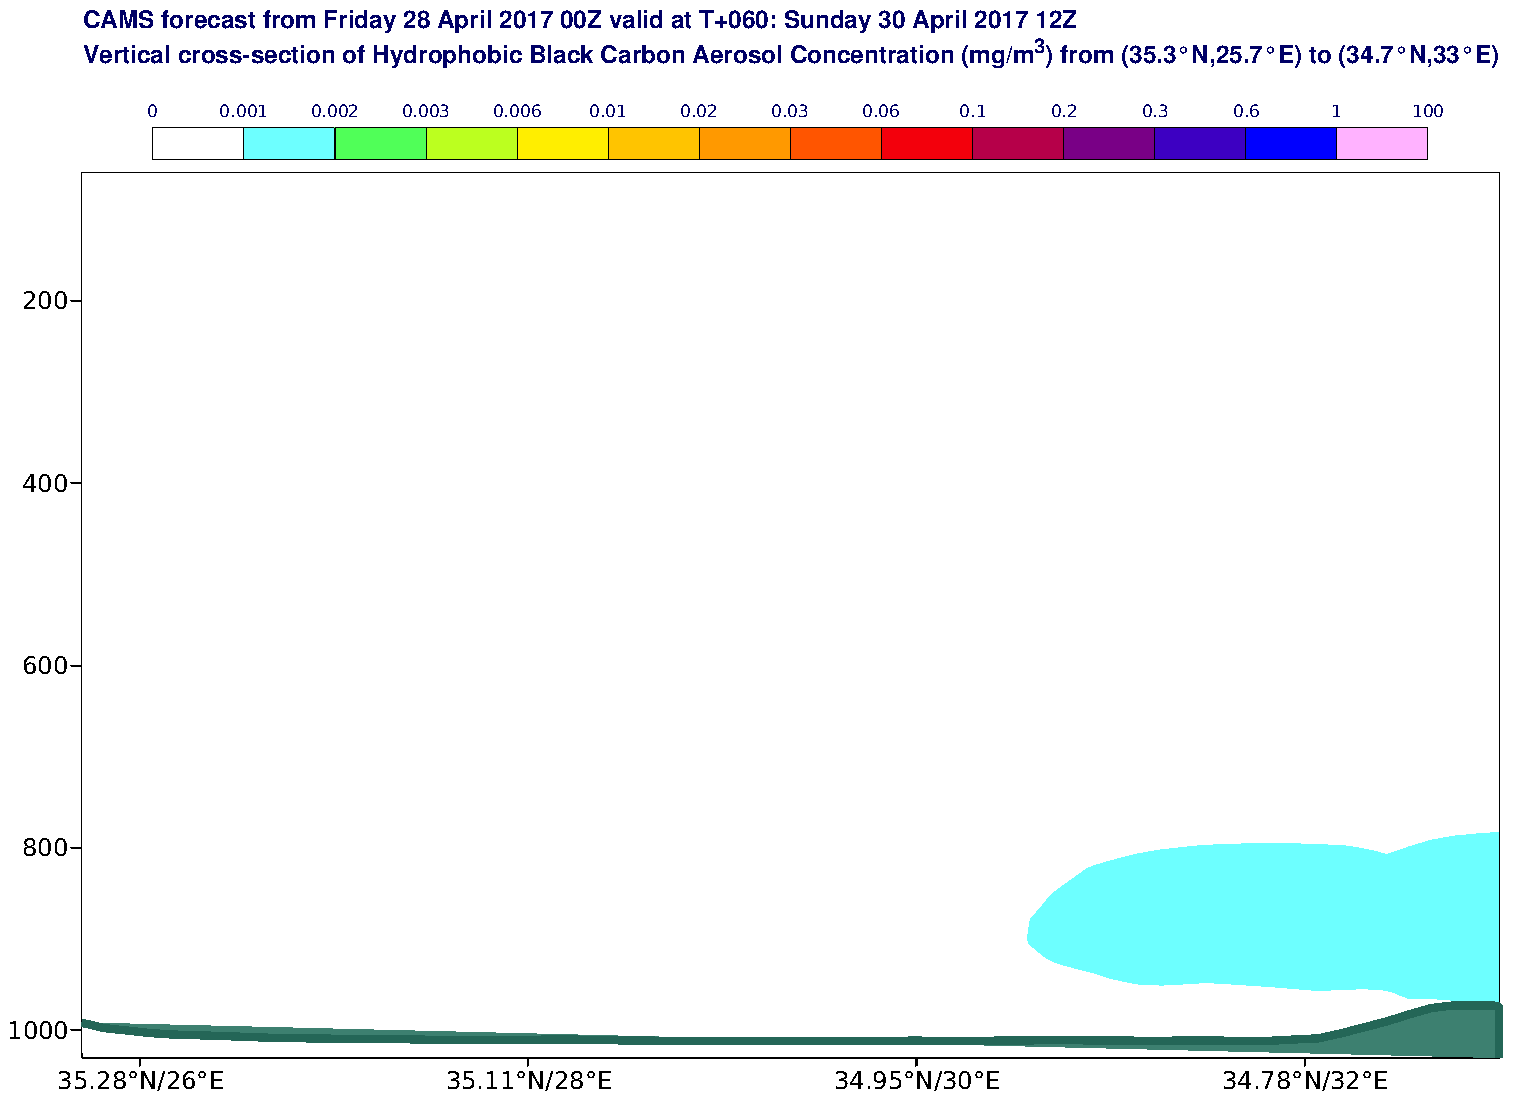 Vertical cross-section of Hydrophobic Black Carbon Aerosol Concentration (mg/m3) valid at T60 - 2017-04-30 12:00